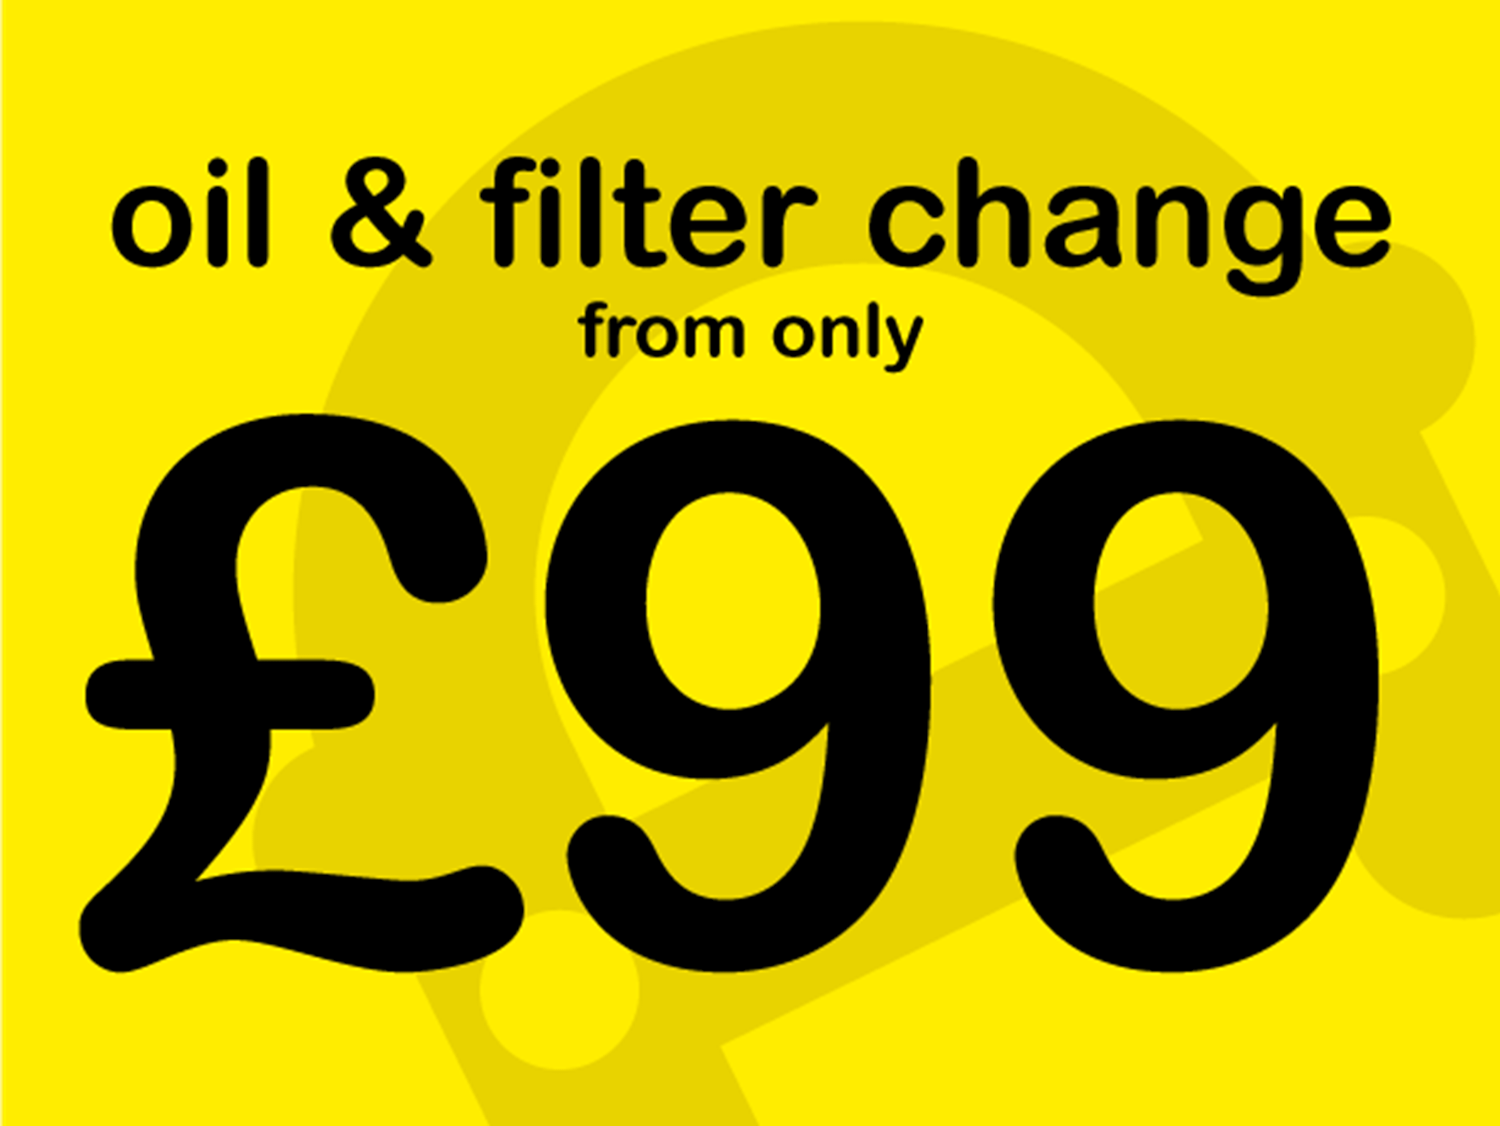 Oil & filter change from only £99